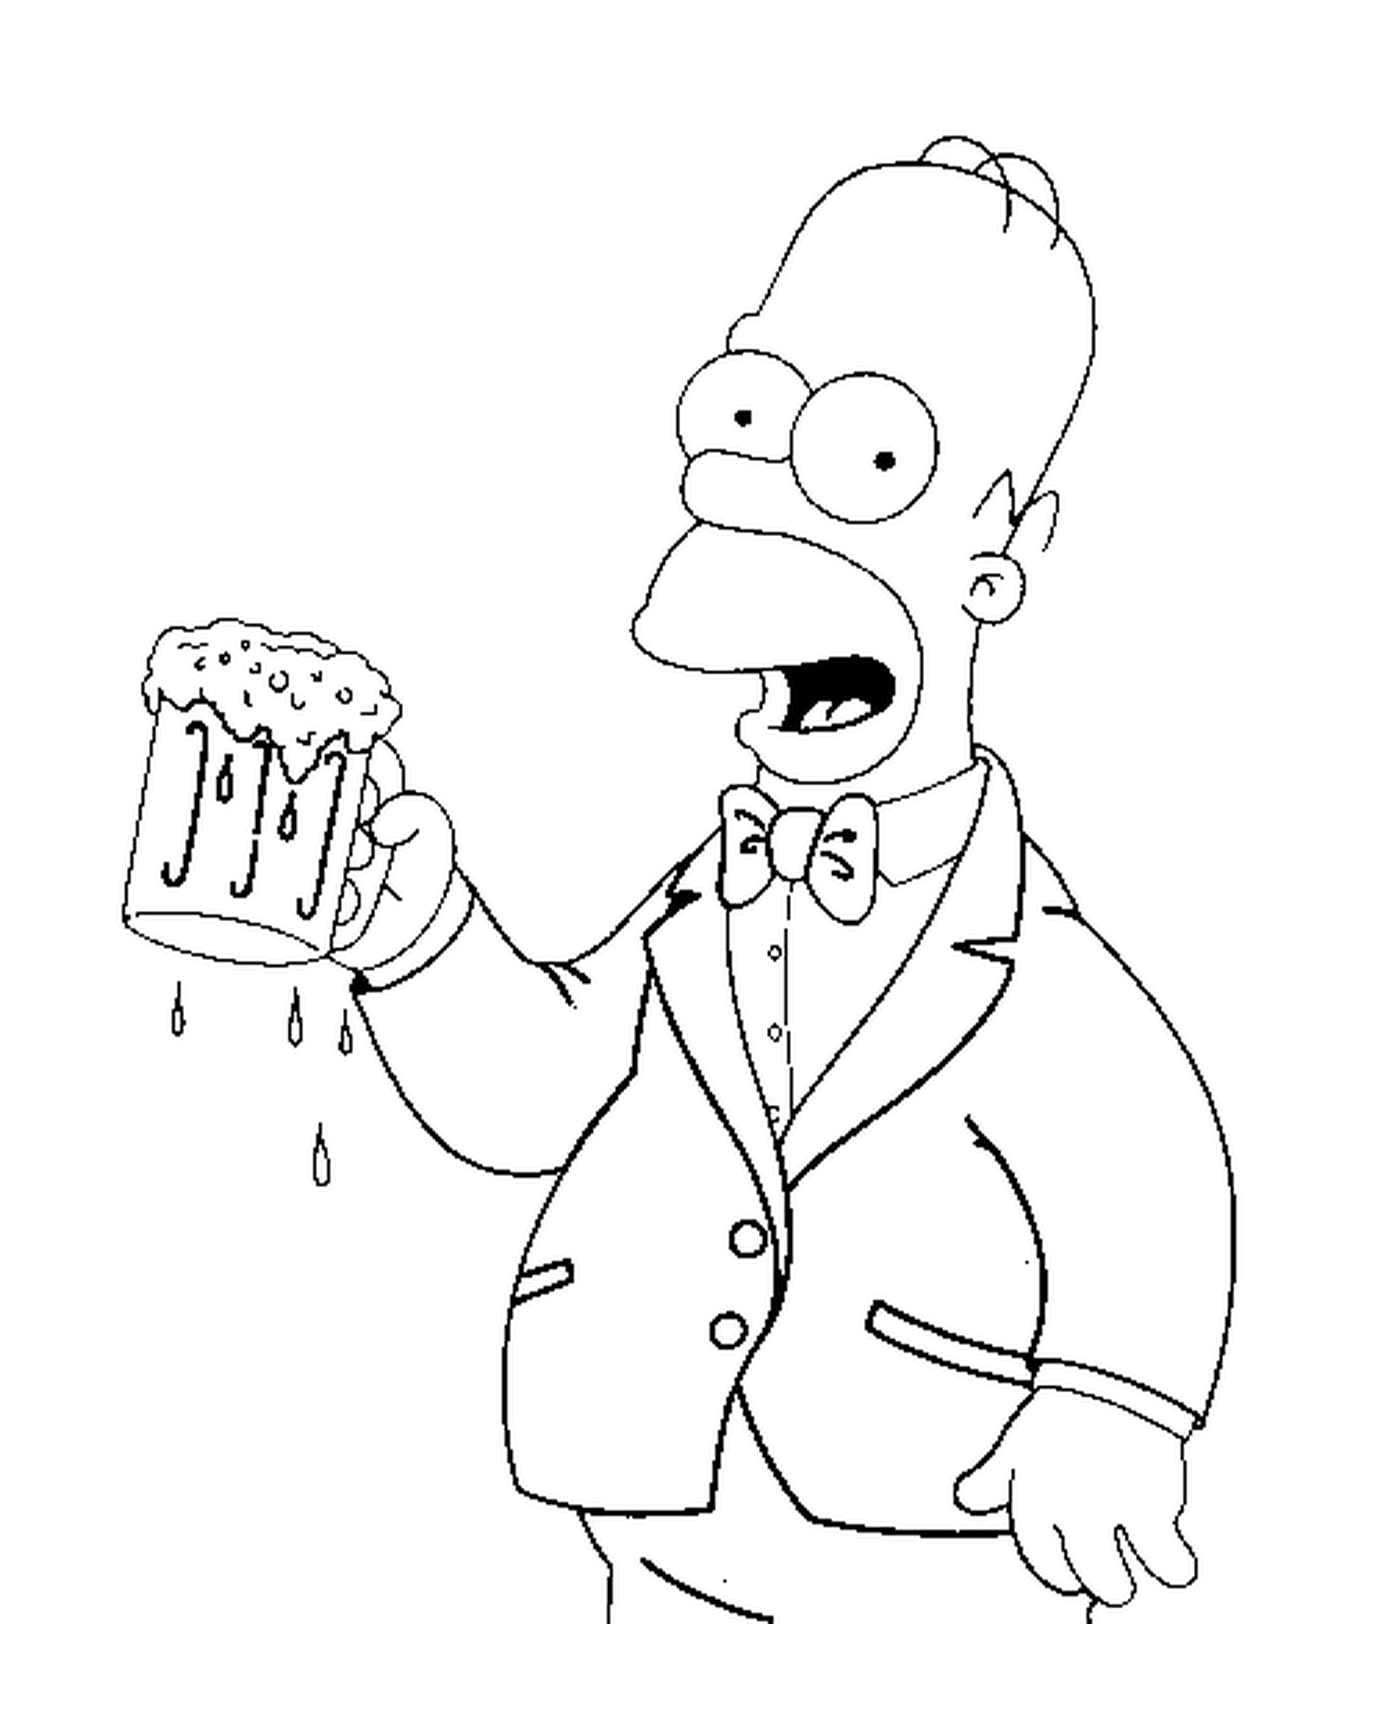  Homer holds a fresh beer 